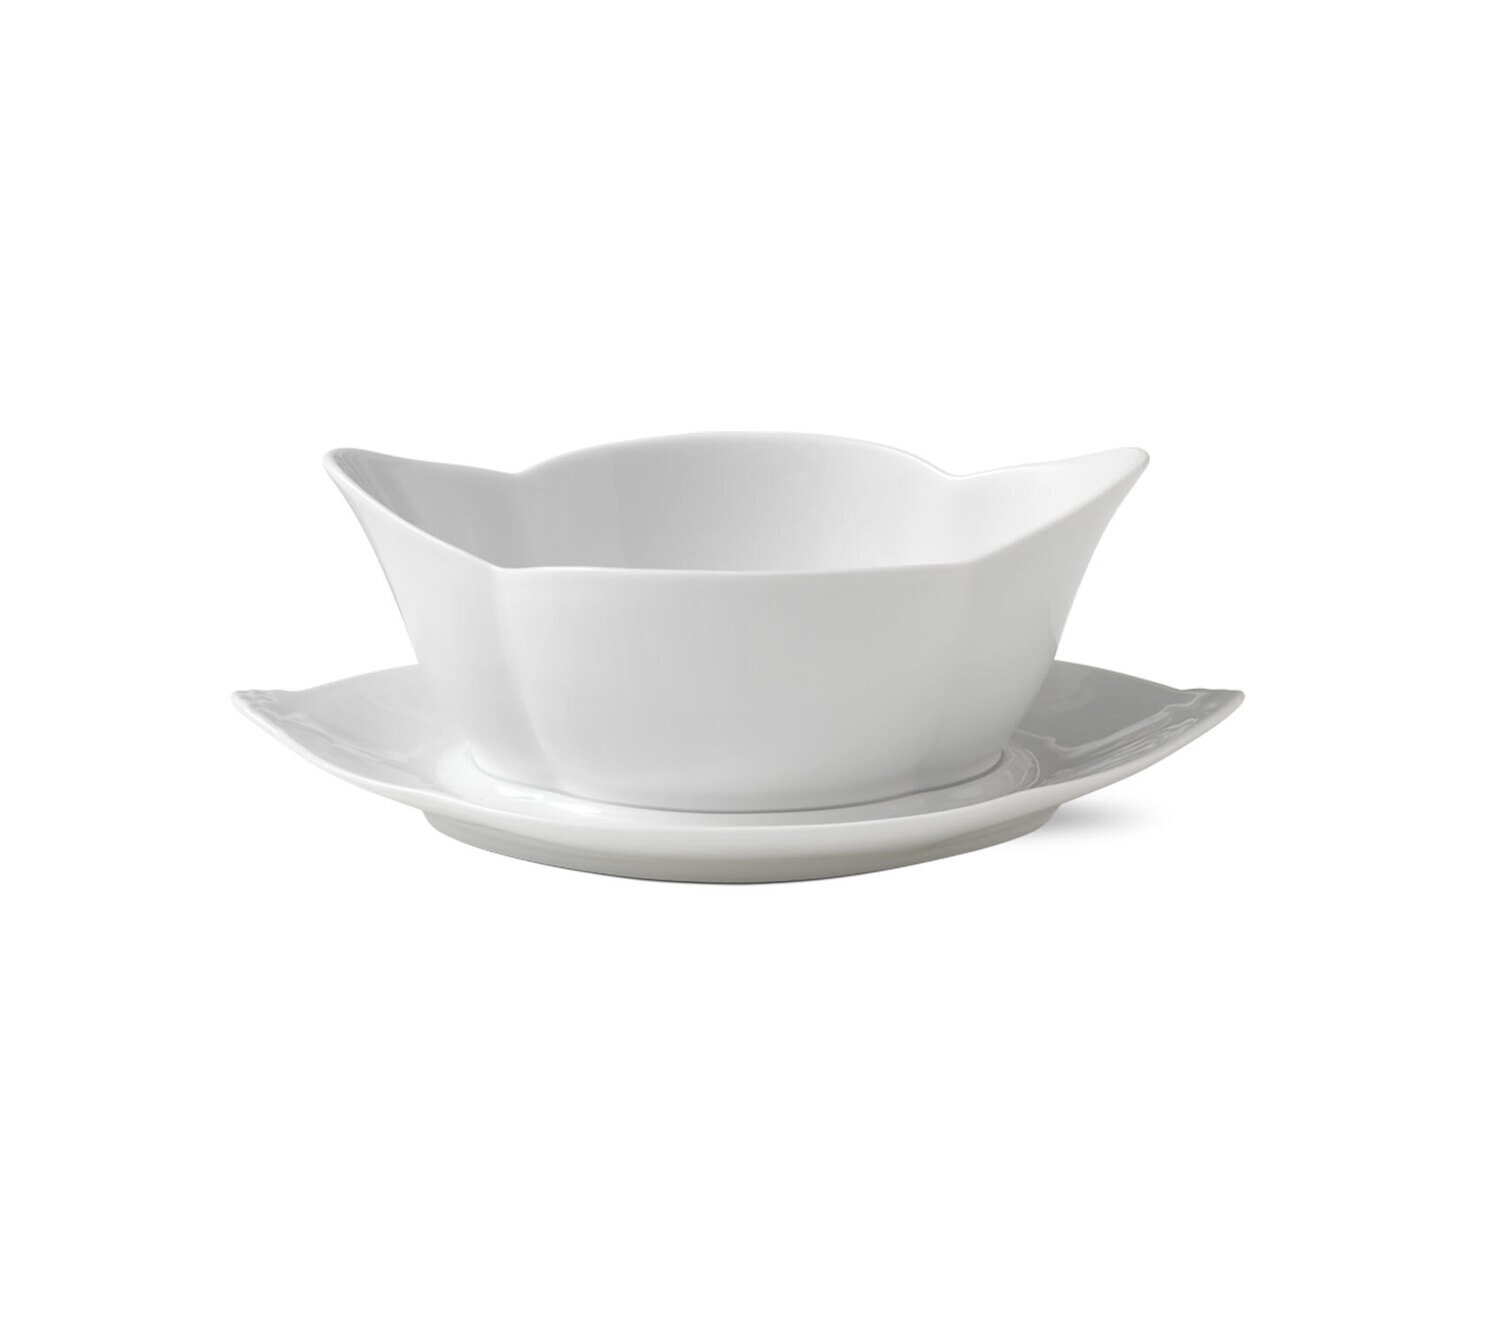 Royal Copenhagen White Fluted Gravy Boat With Stand 18.5Oz 1017398